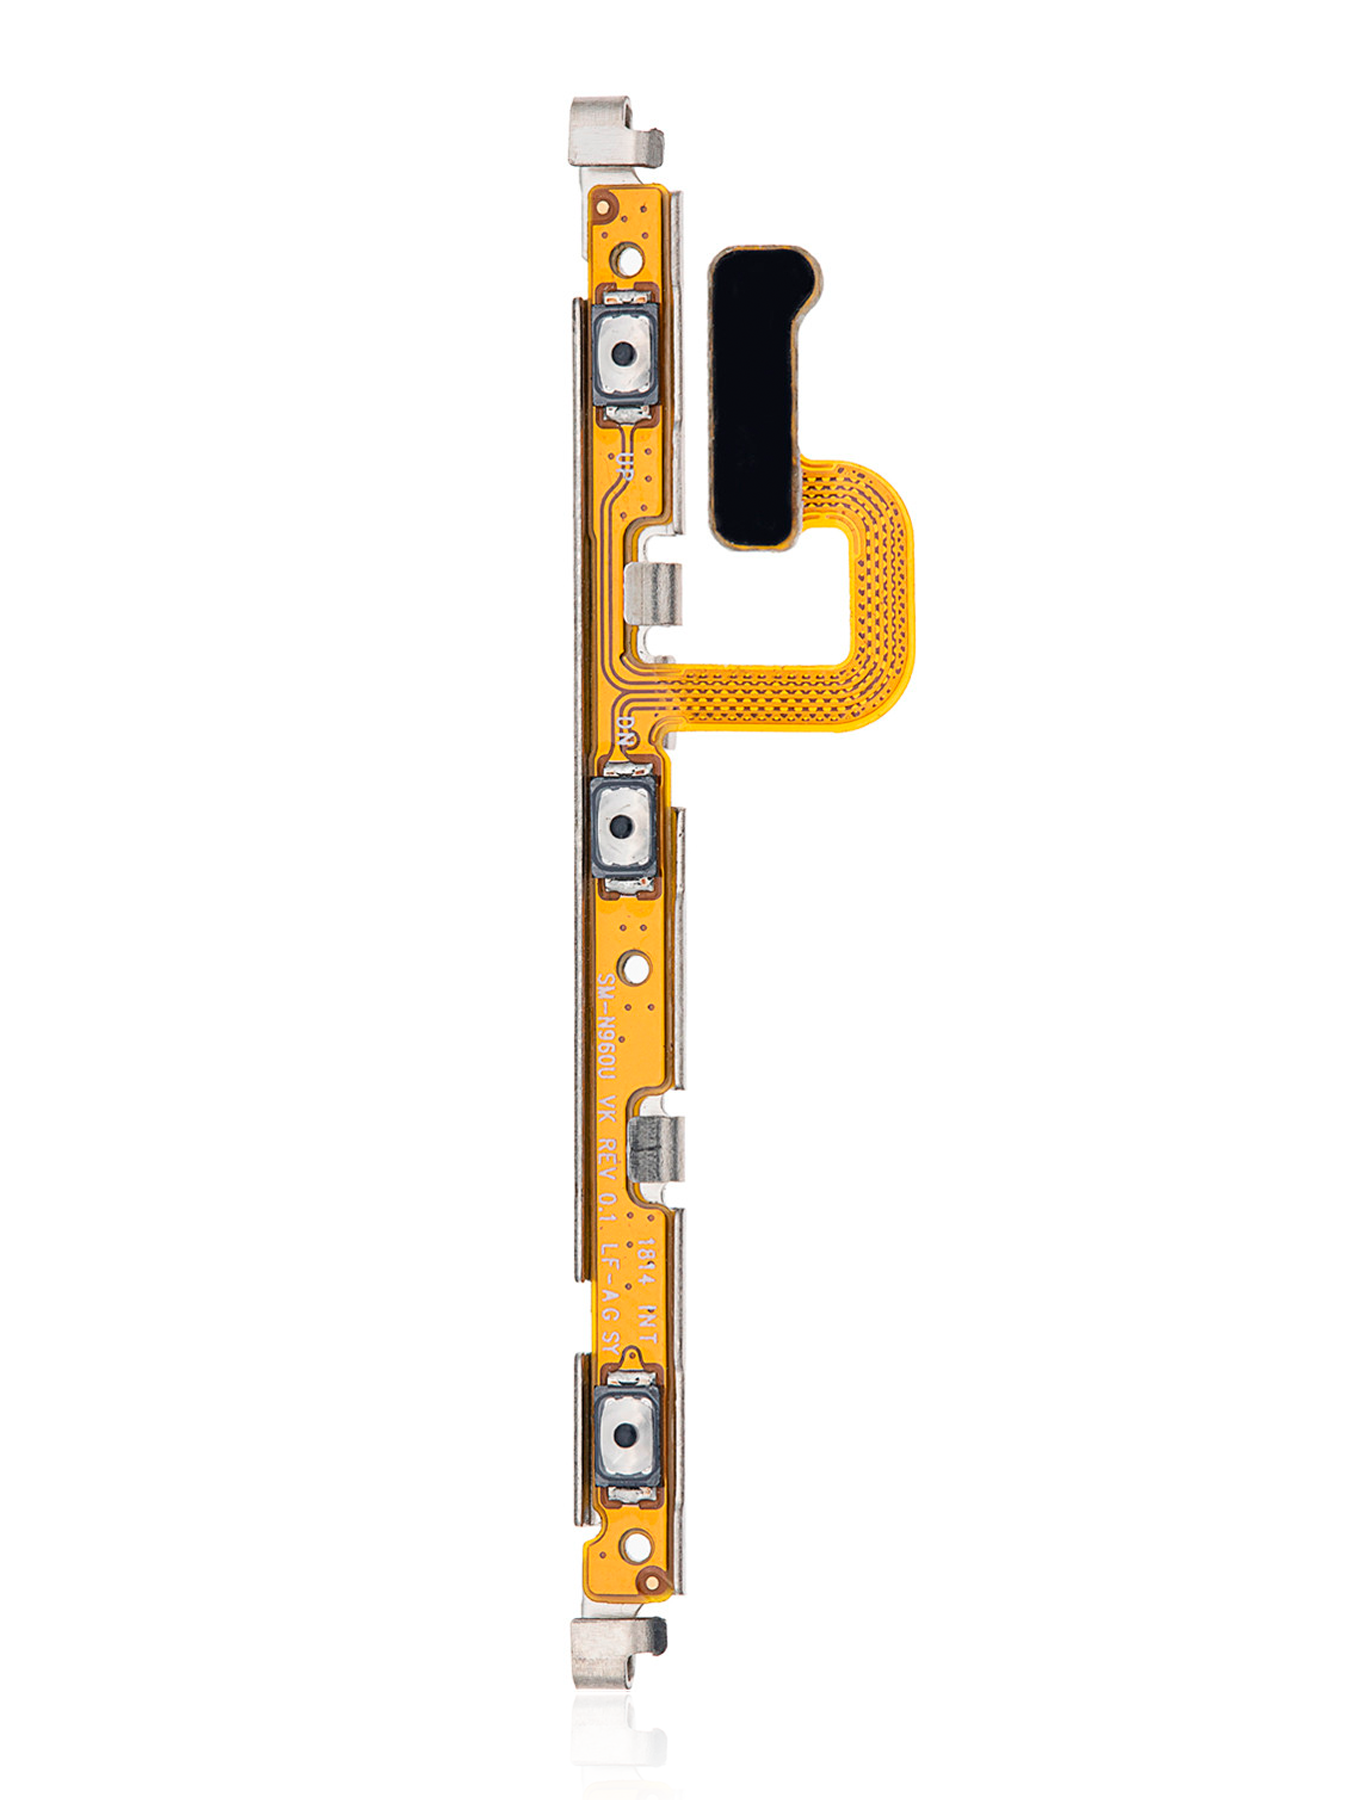 For Samsung Galaxy Note 9 Volume Button Flex Cable Replacement